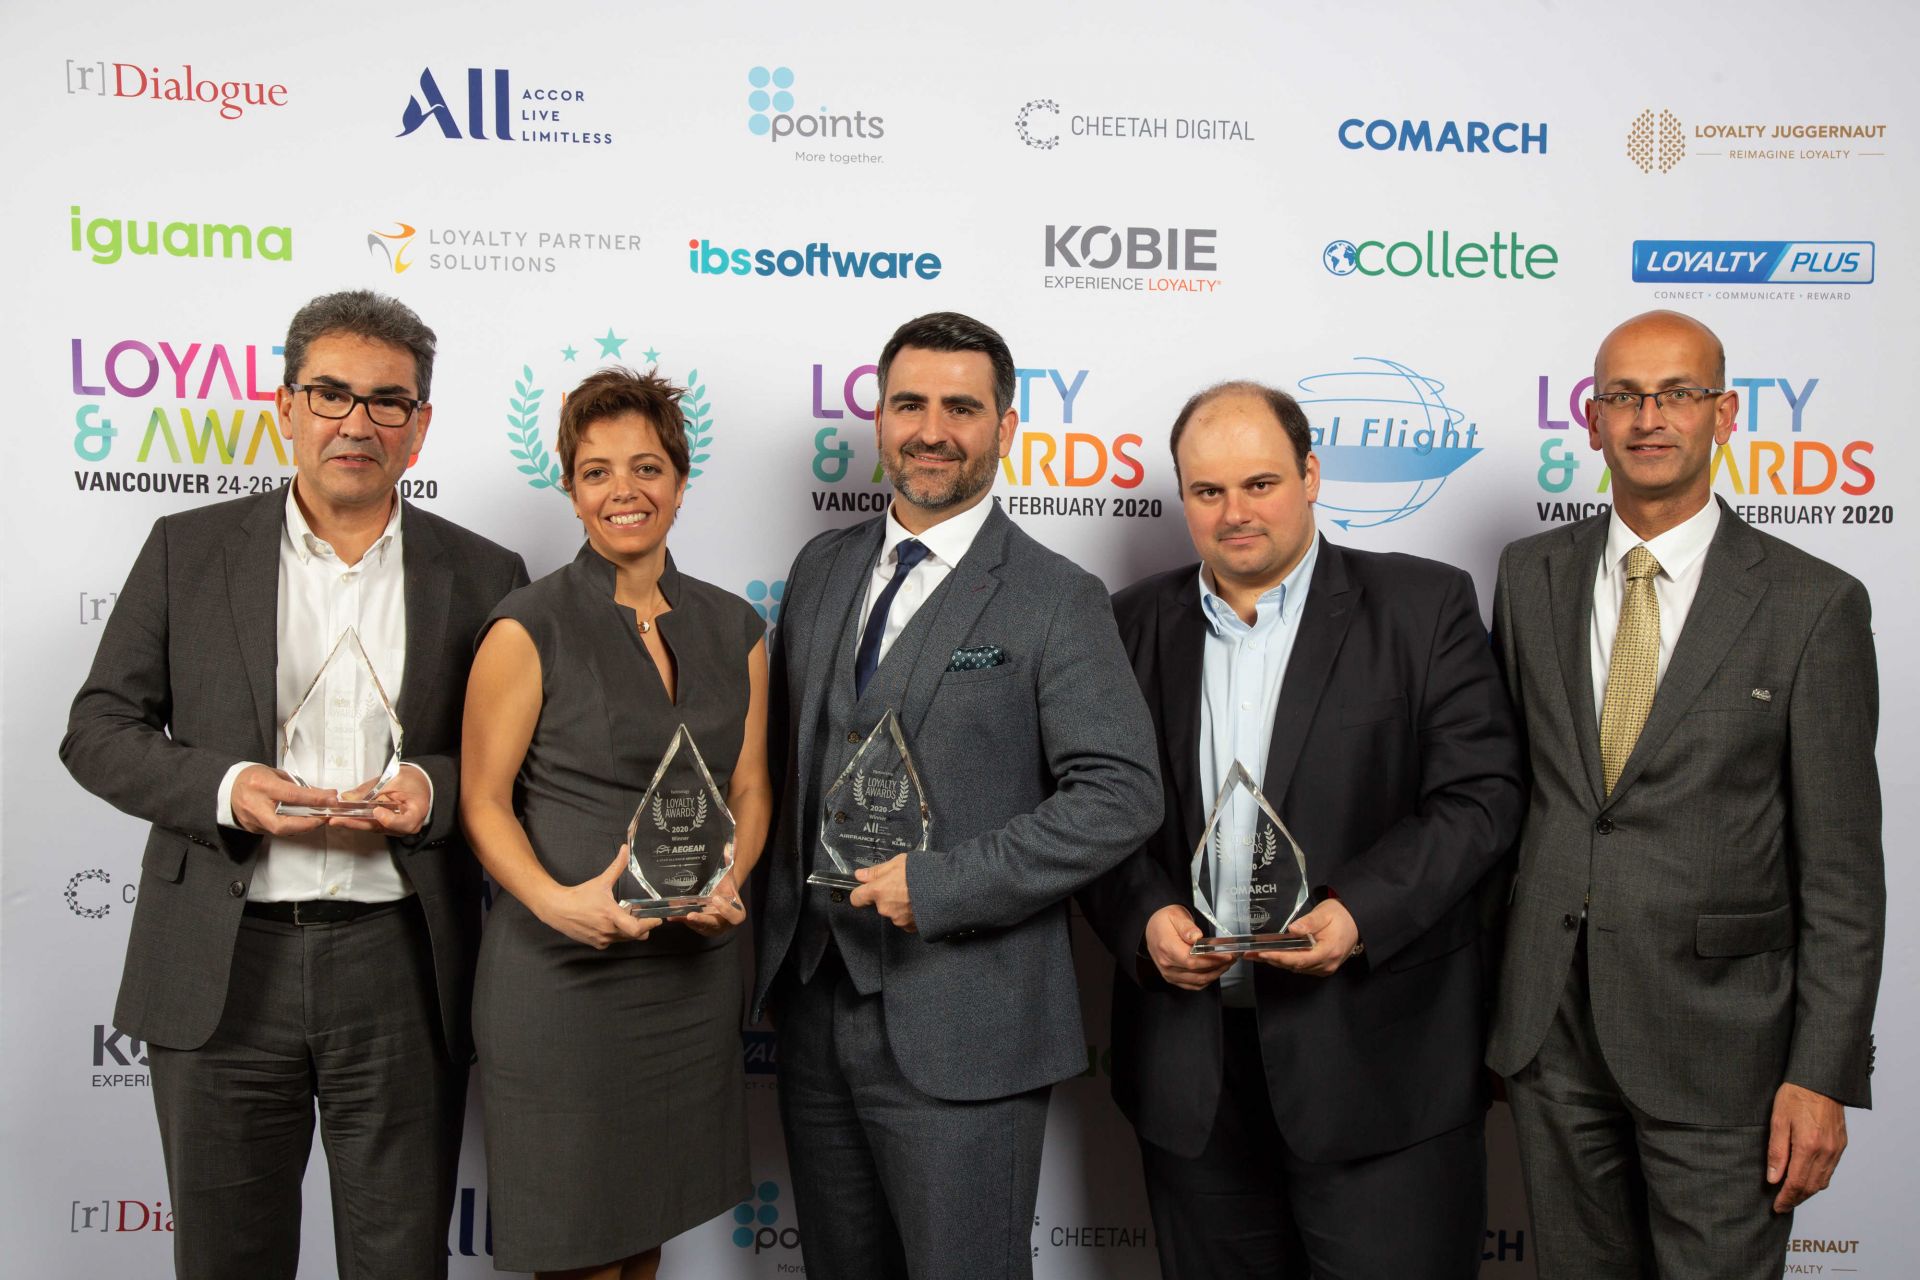 Loyalty&Awards 2020 winners comarch